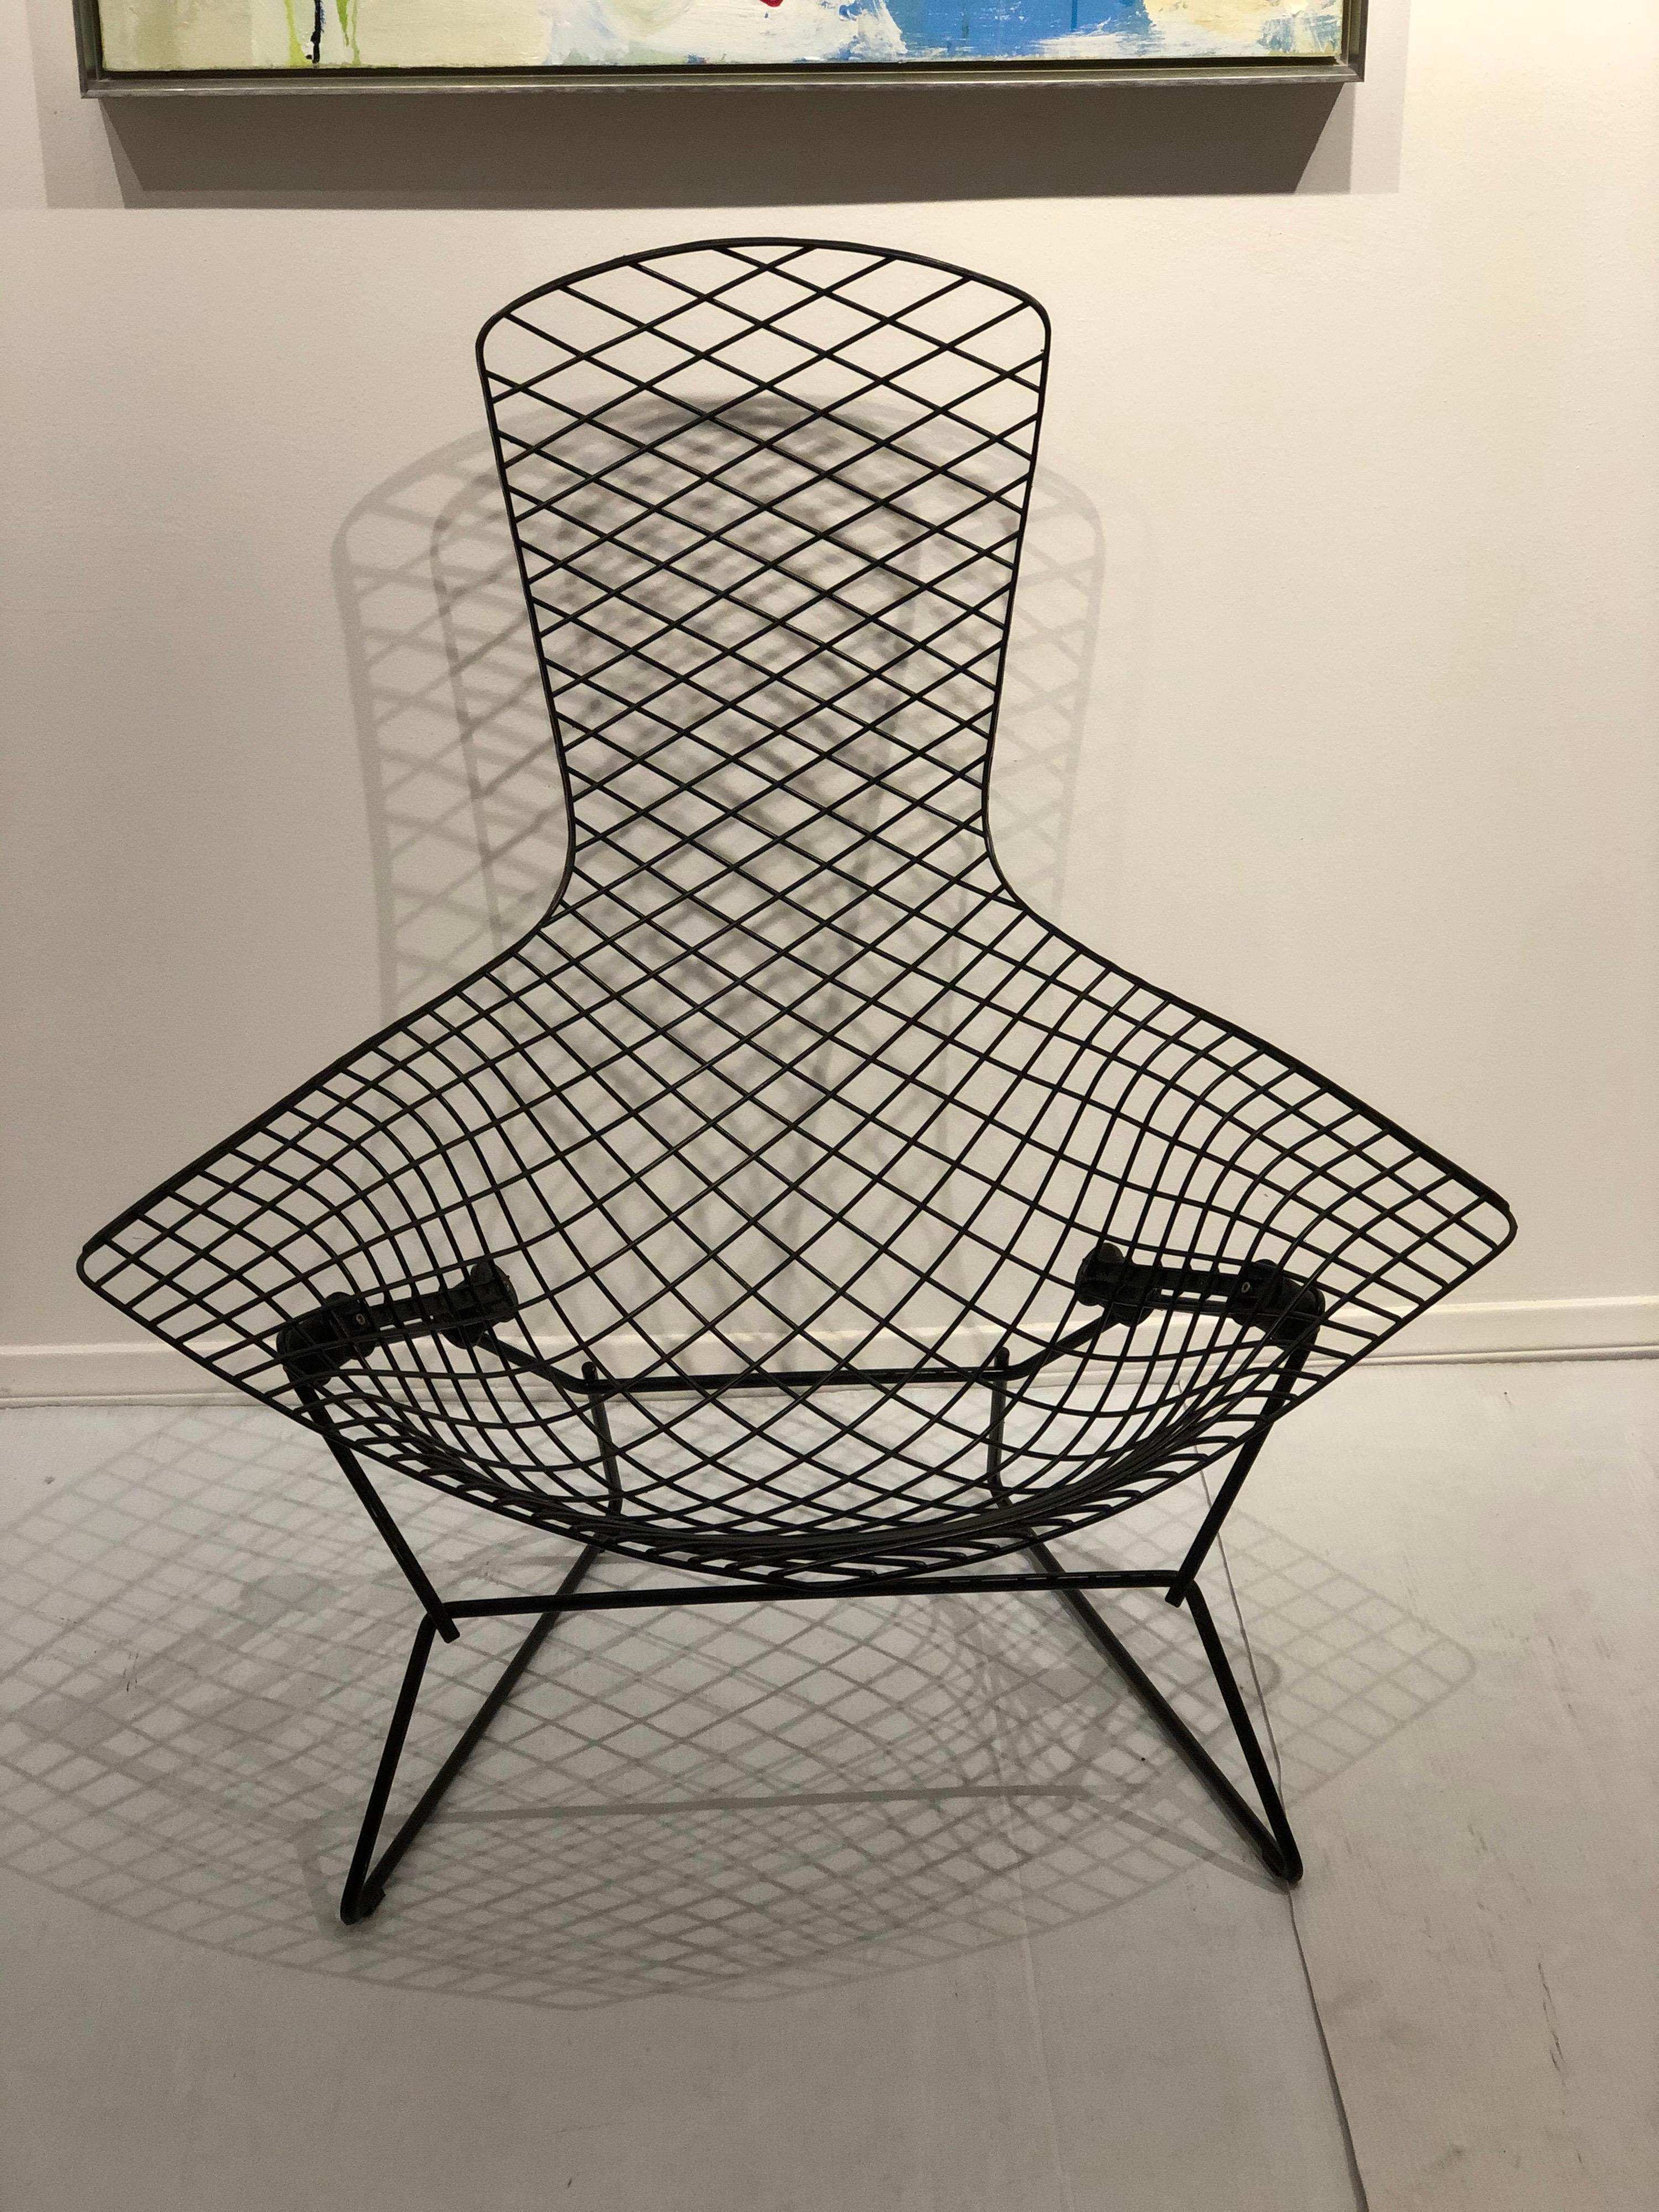 Great chair designed by Harry Bertoia for Knoll, the chair its all in its original finish the shock look good and the finish its nicely worn.